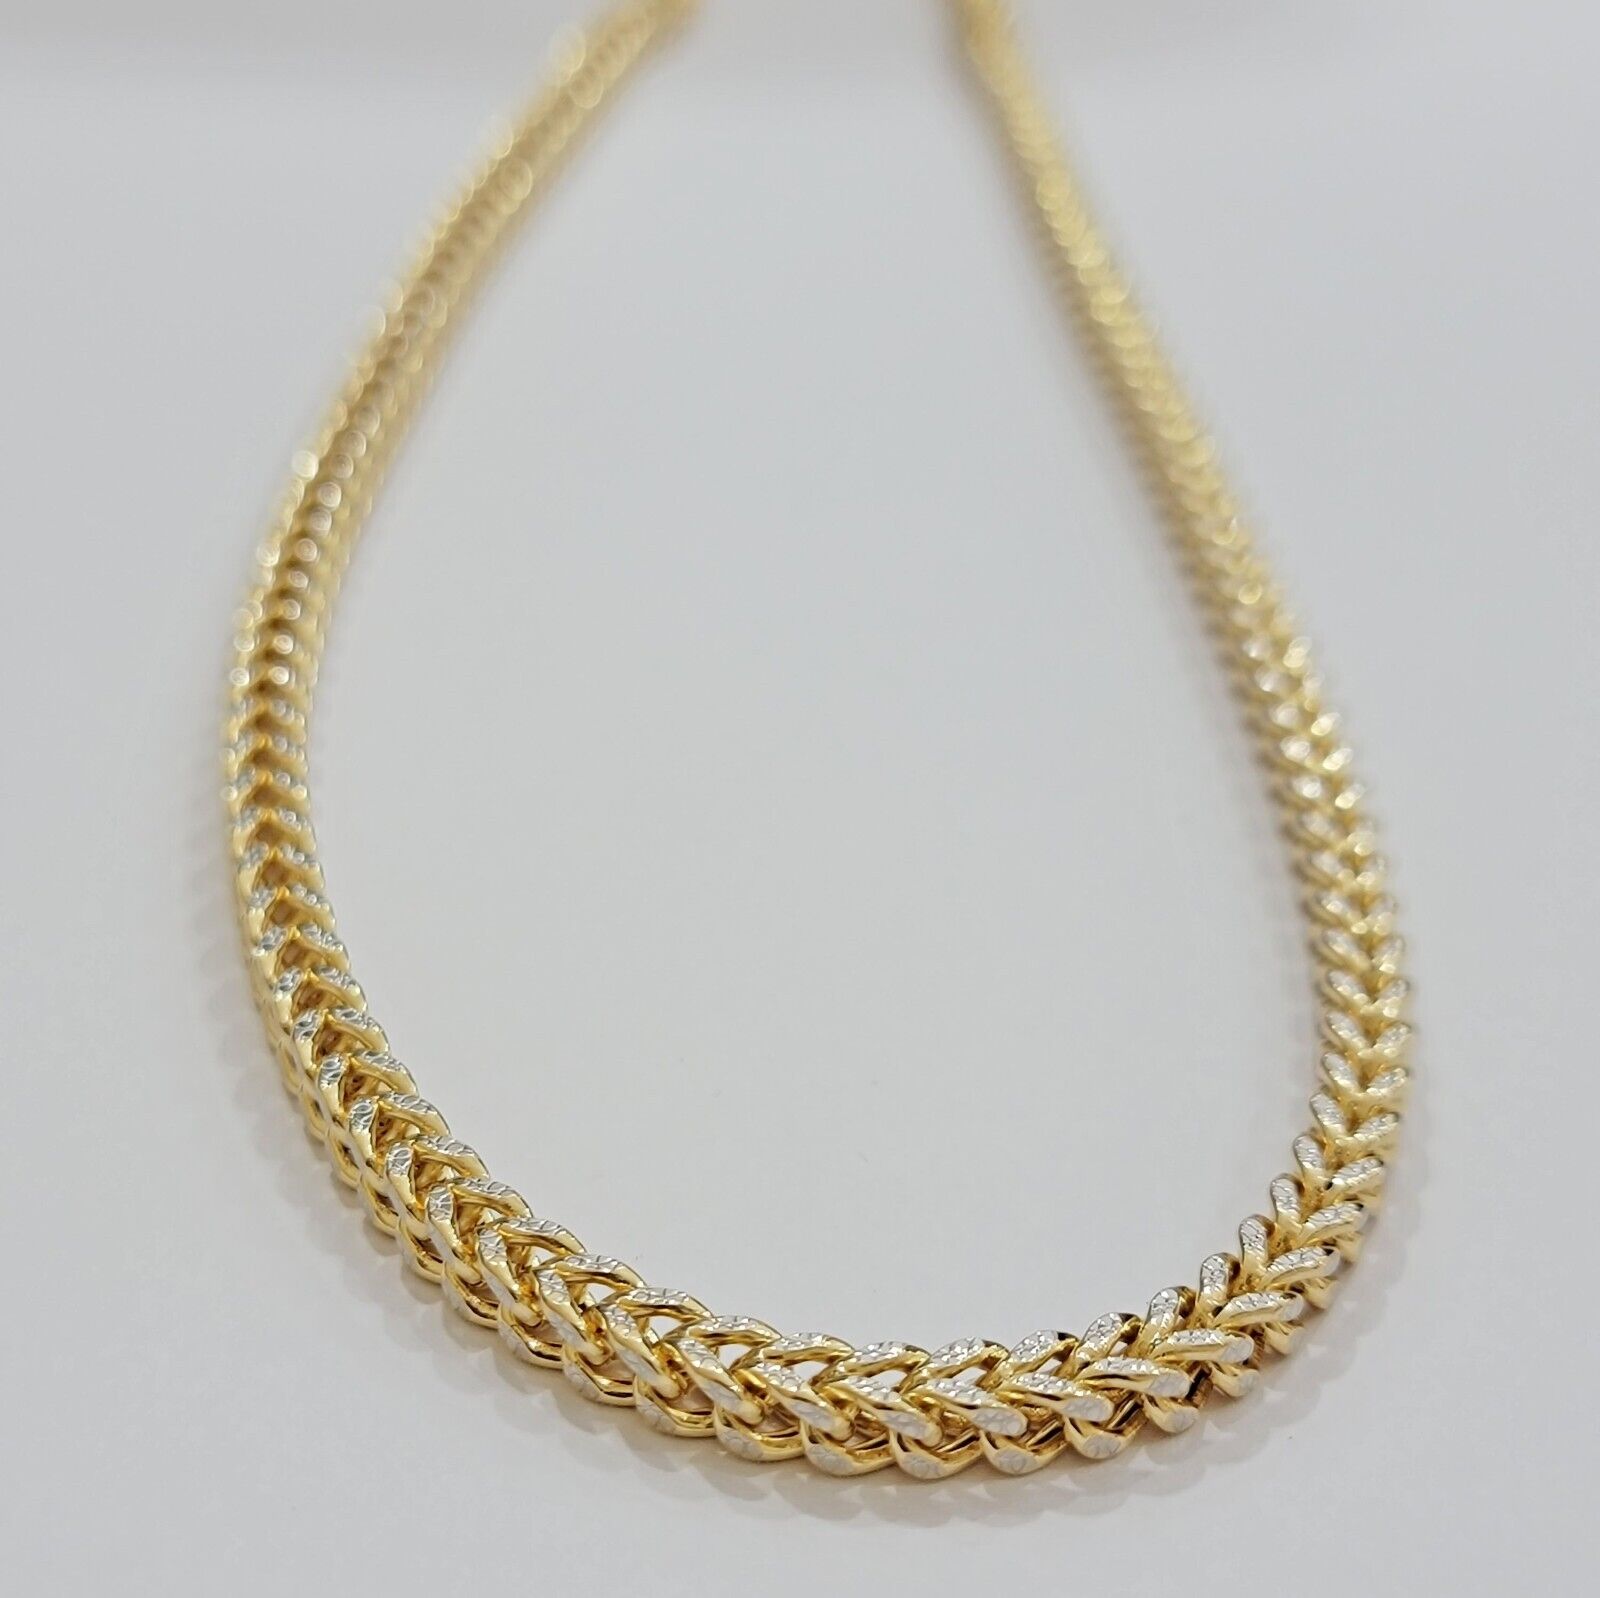 Real 14k Gold Necklace Franco Chain 4mm 18" Short Diamond Cuts 14 KT Yellow Gold